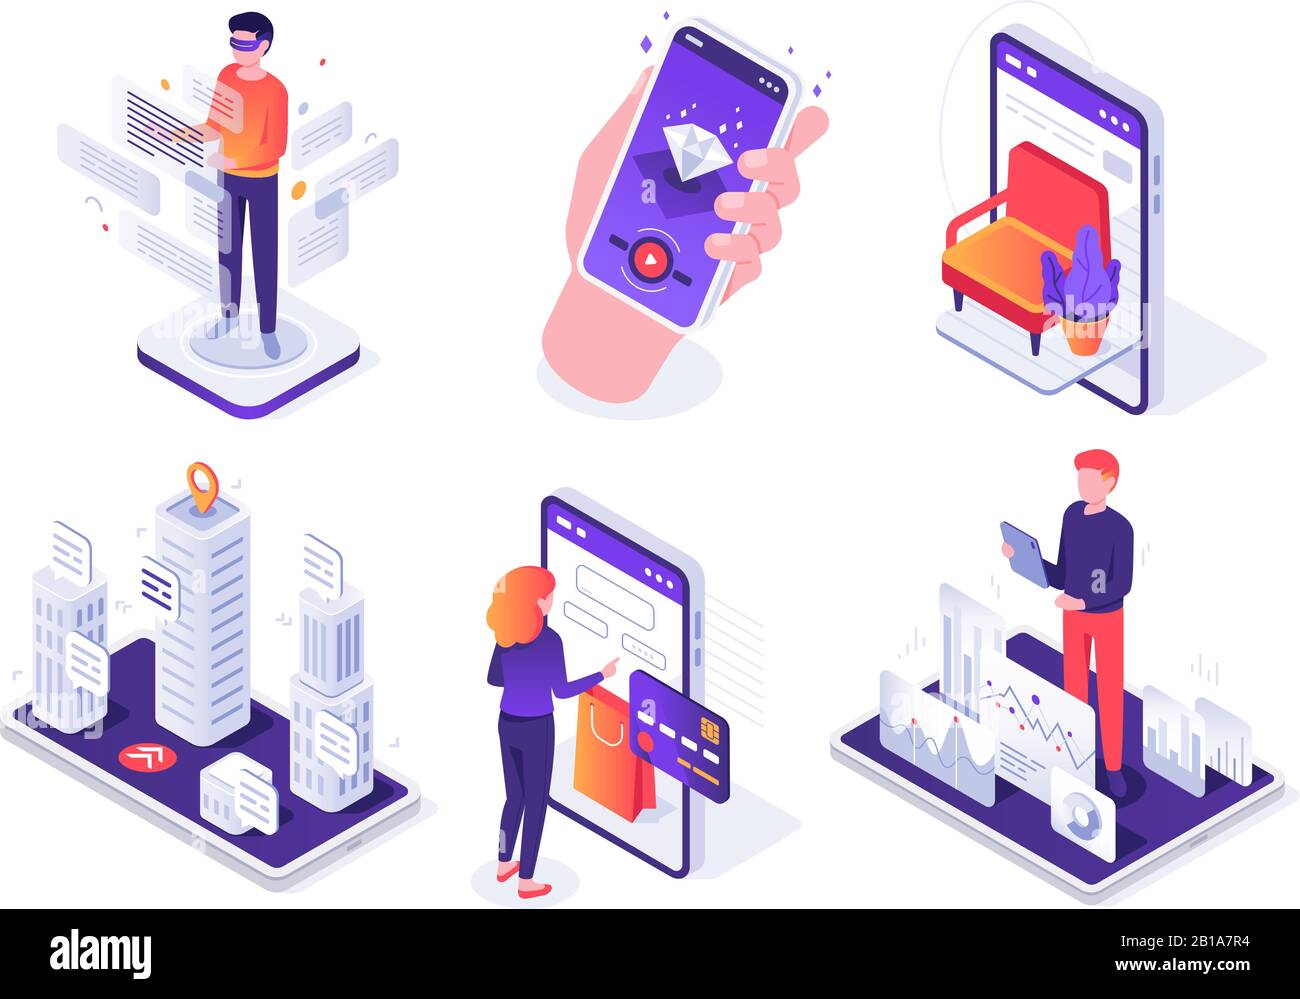 Isometric augmented reality smartphone. Mobile AR platform, virtual game and smartphones 3d navigation vector concept illustration set Stock Vector